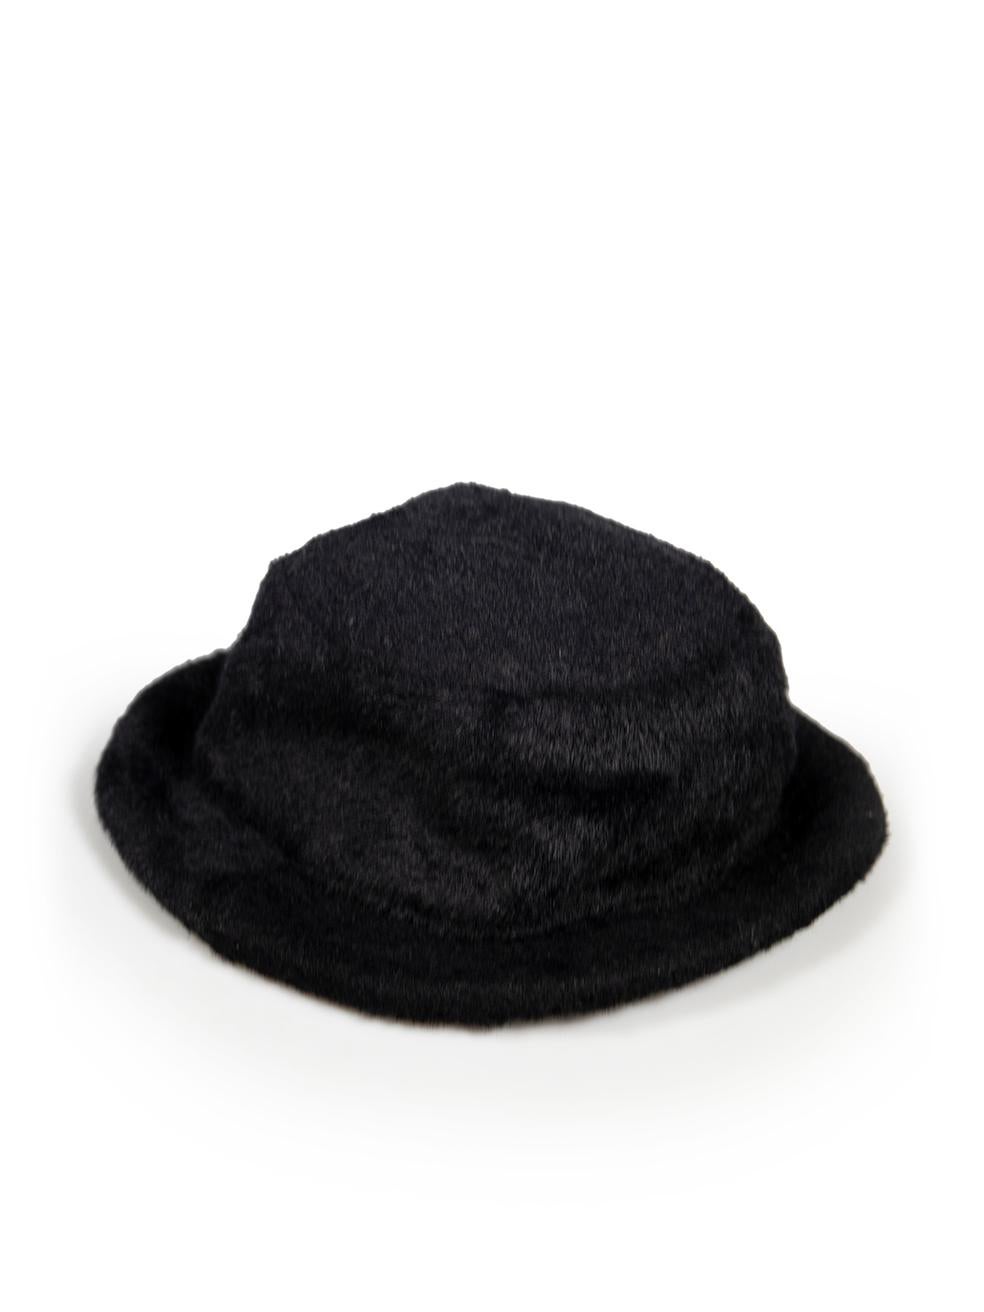 CONDITION is Very good. Hardly any visible wear to hat is evident on this used Ruslan Baginskiy designer resale item.
 
 
 
 Details
 
 
 Black
 
 Polyester
 
 Bucket hat
 
 
 
 
 
 Made in Ukraine
 
 
 
 Composition
 
 100% Polyester
 
 
 
 Size &